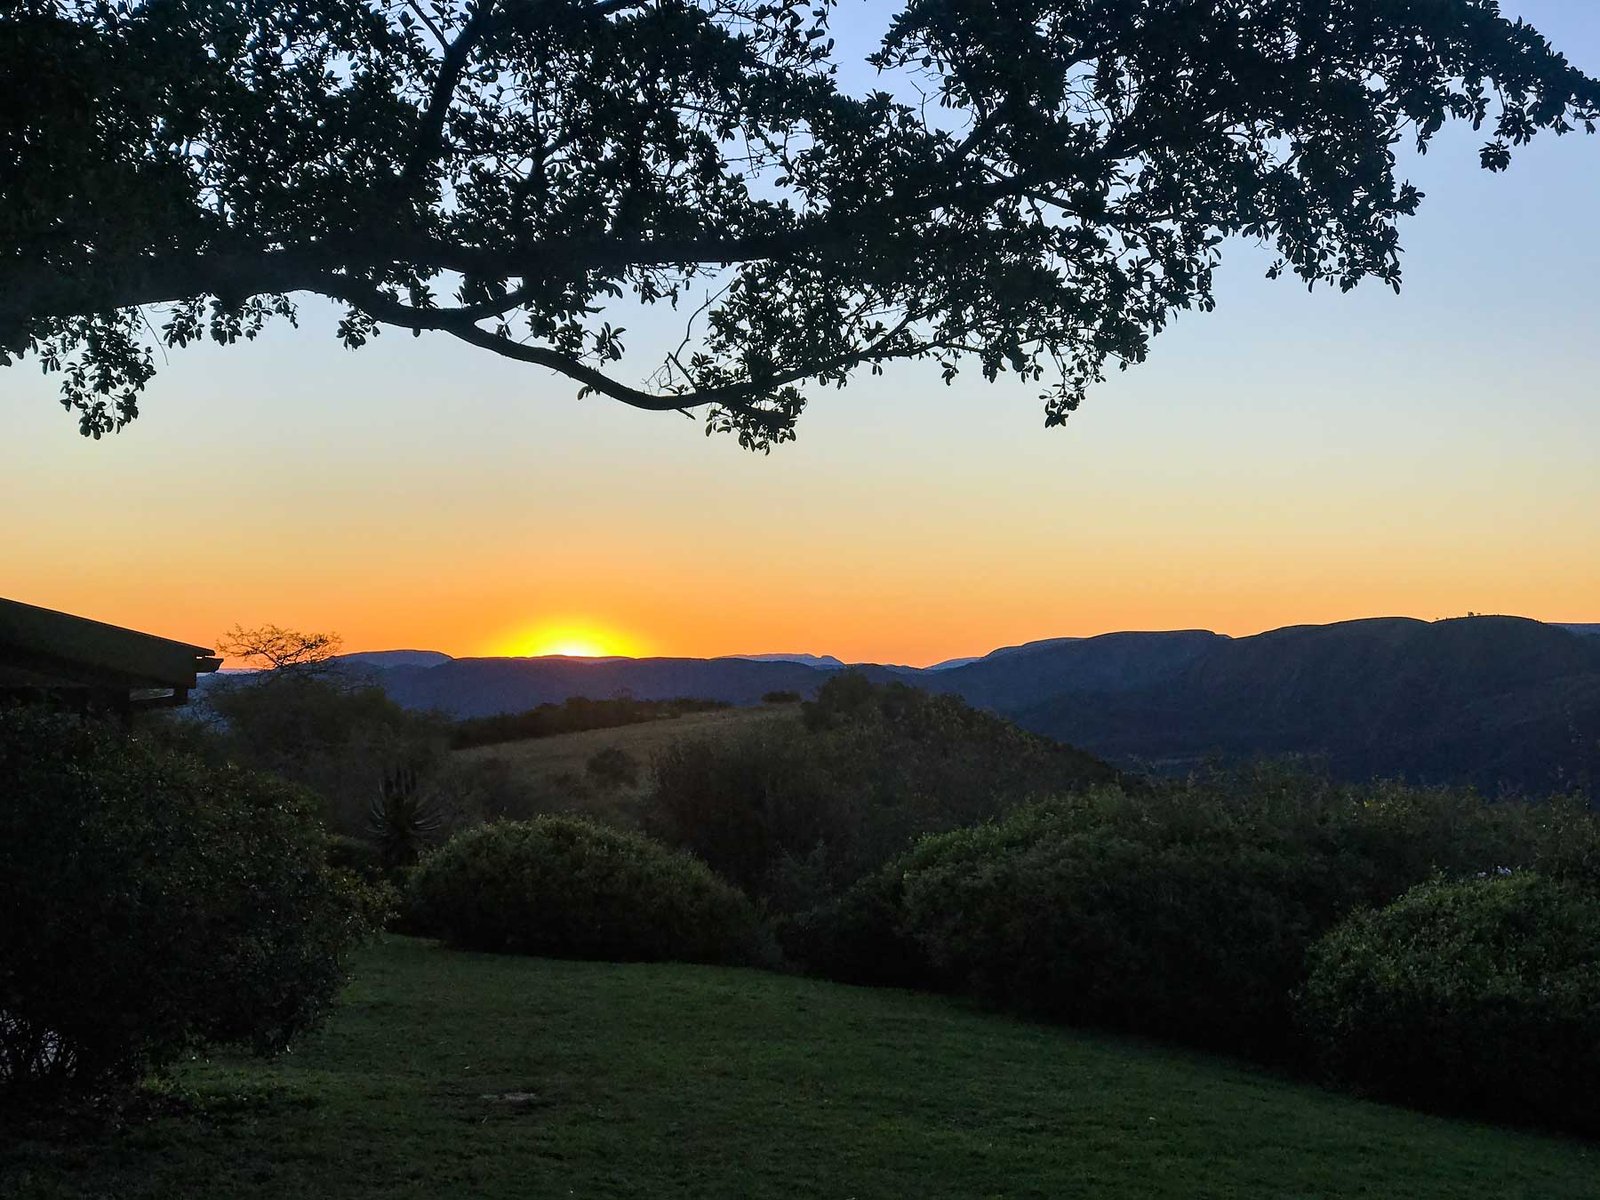 Sunset at Camp Figtree, hotel near Addo Elephant Park. South Africa in 3 Weeks | The Perfect South Africa itinerary for your first trip.